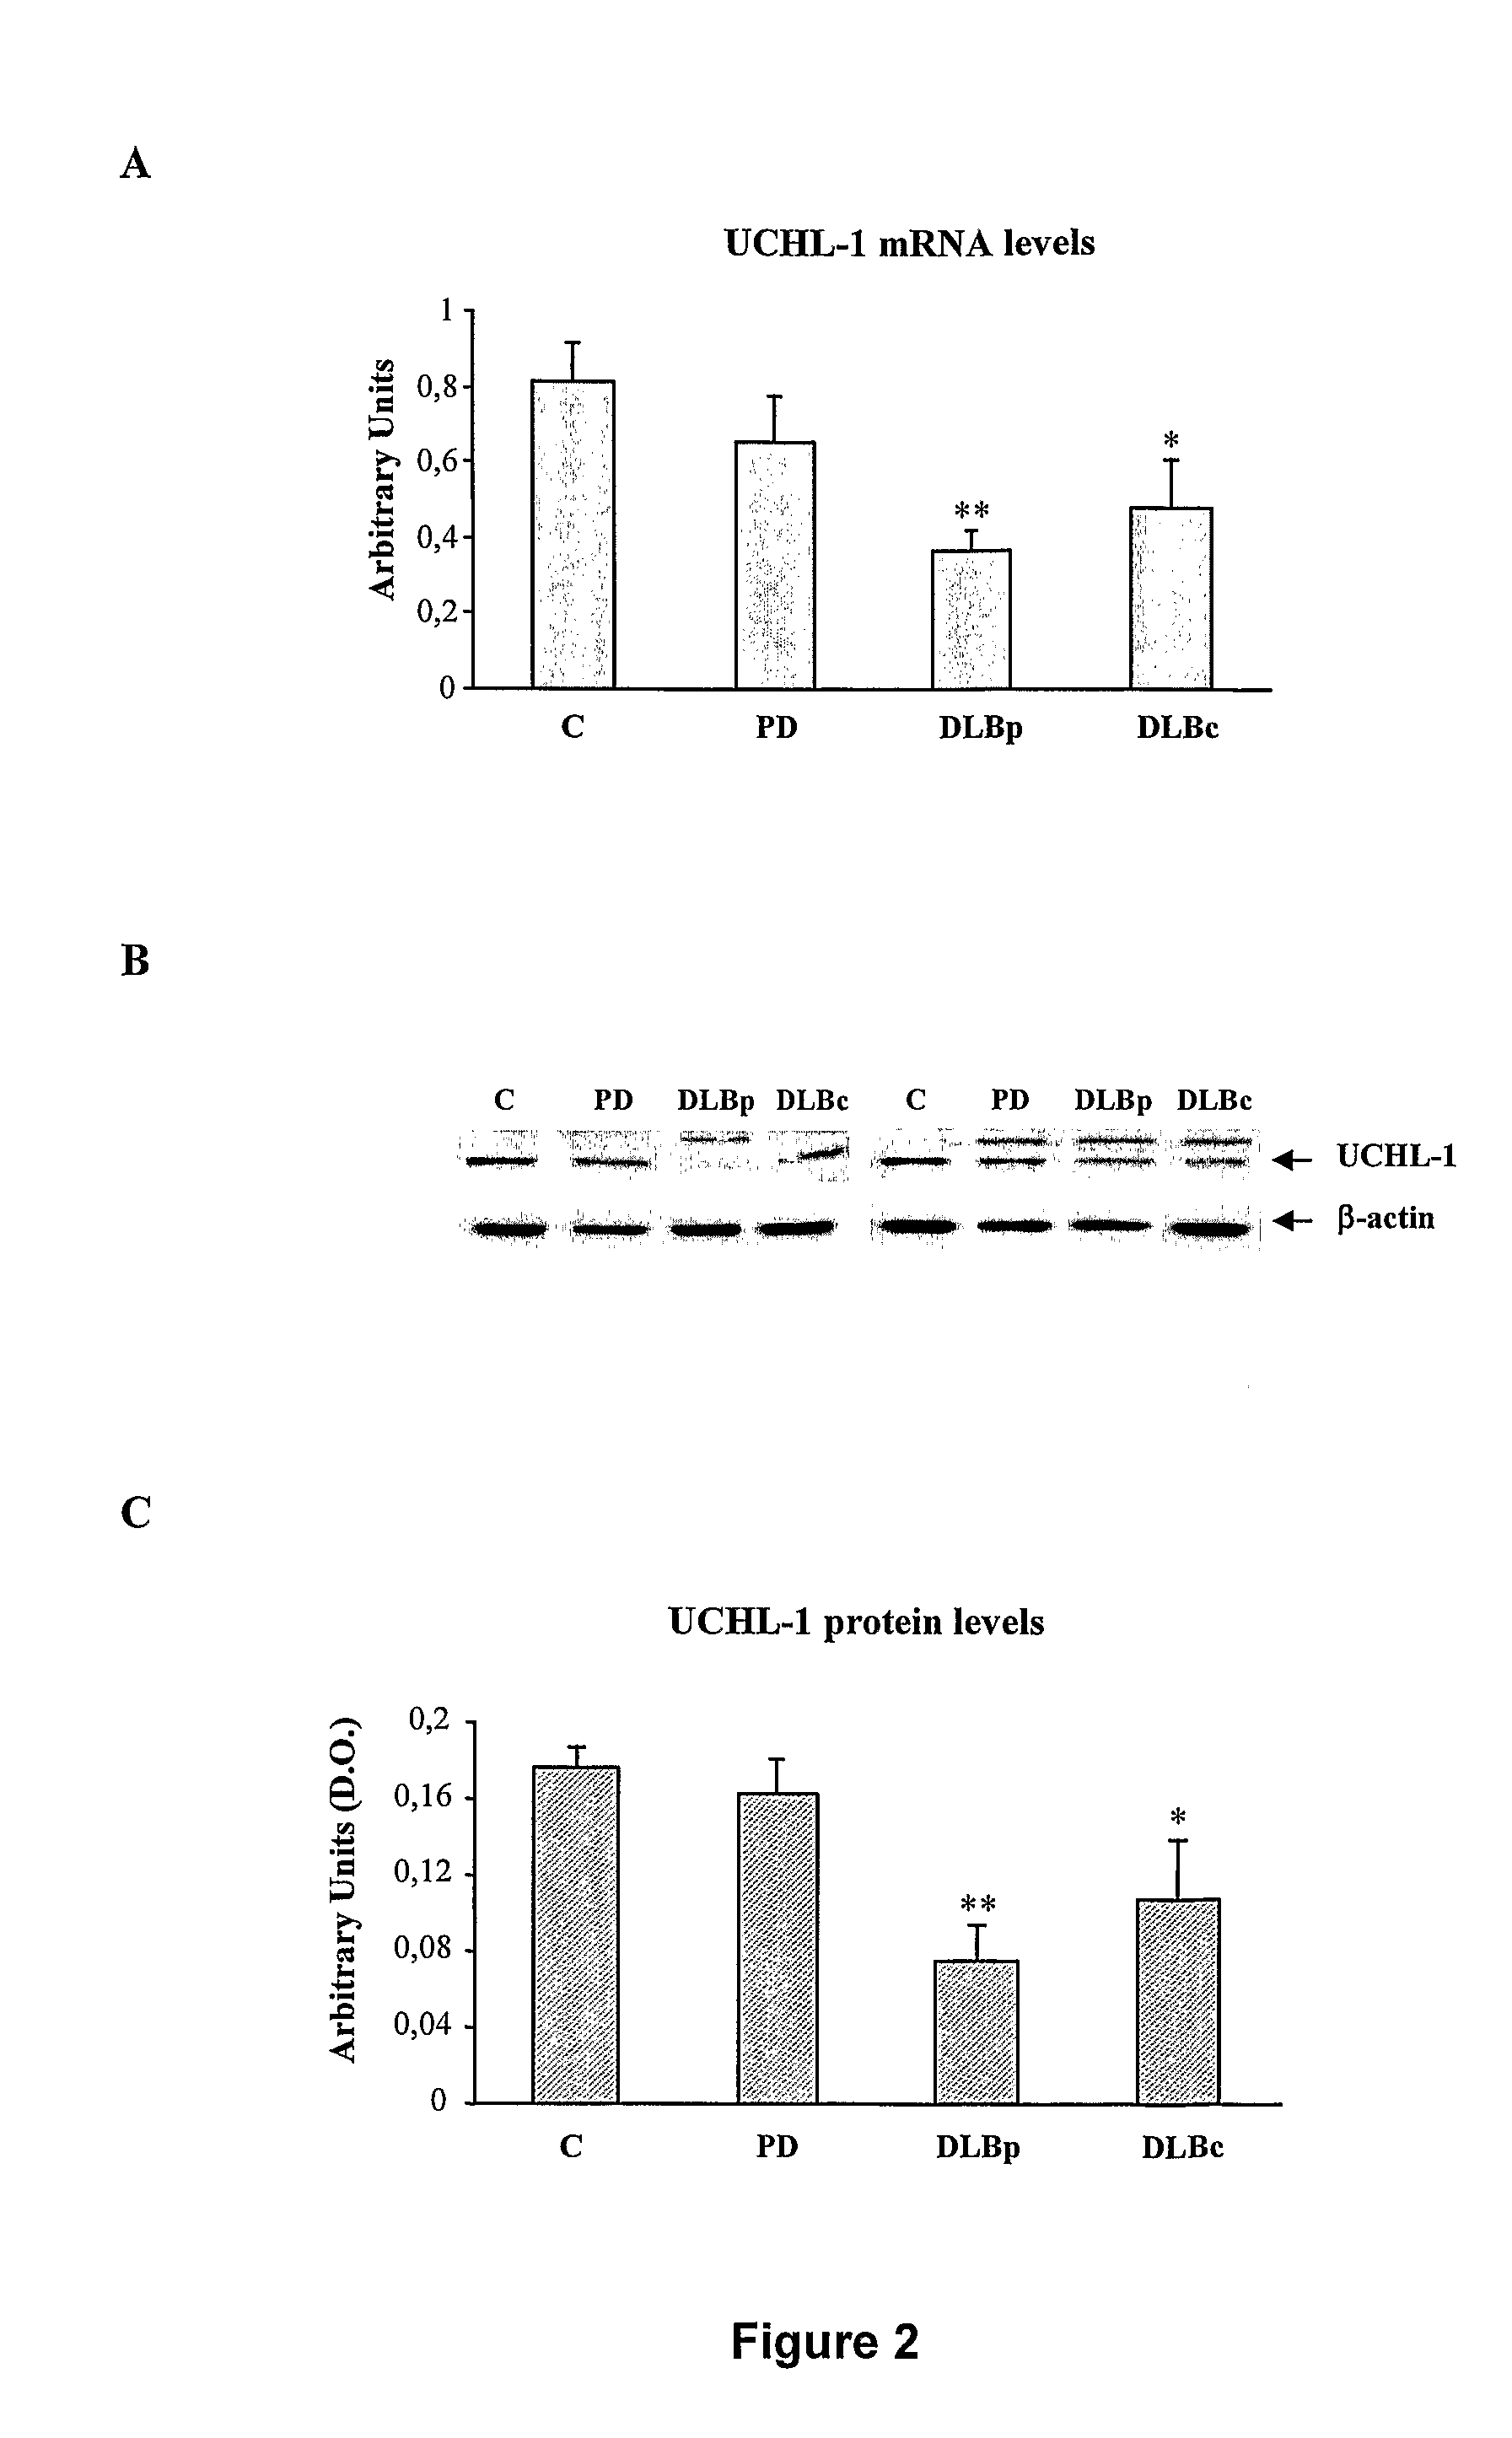 Molecular Diagnostic Method and Treatment in Dementia With Lewy Bodies